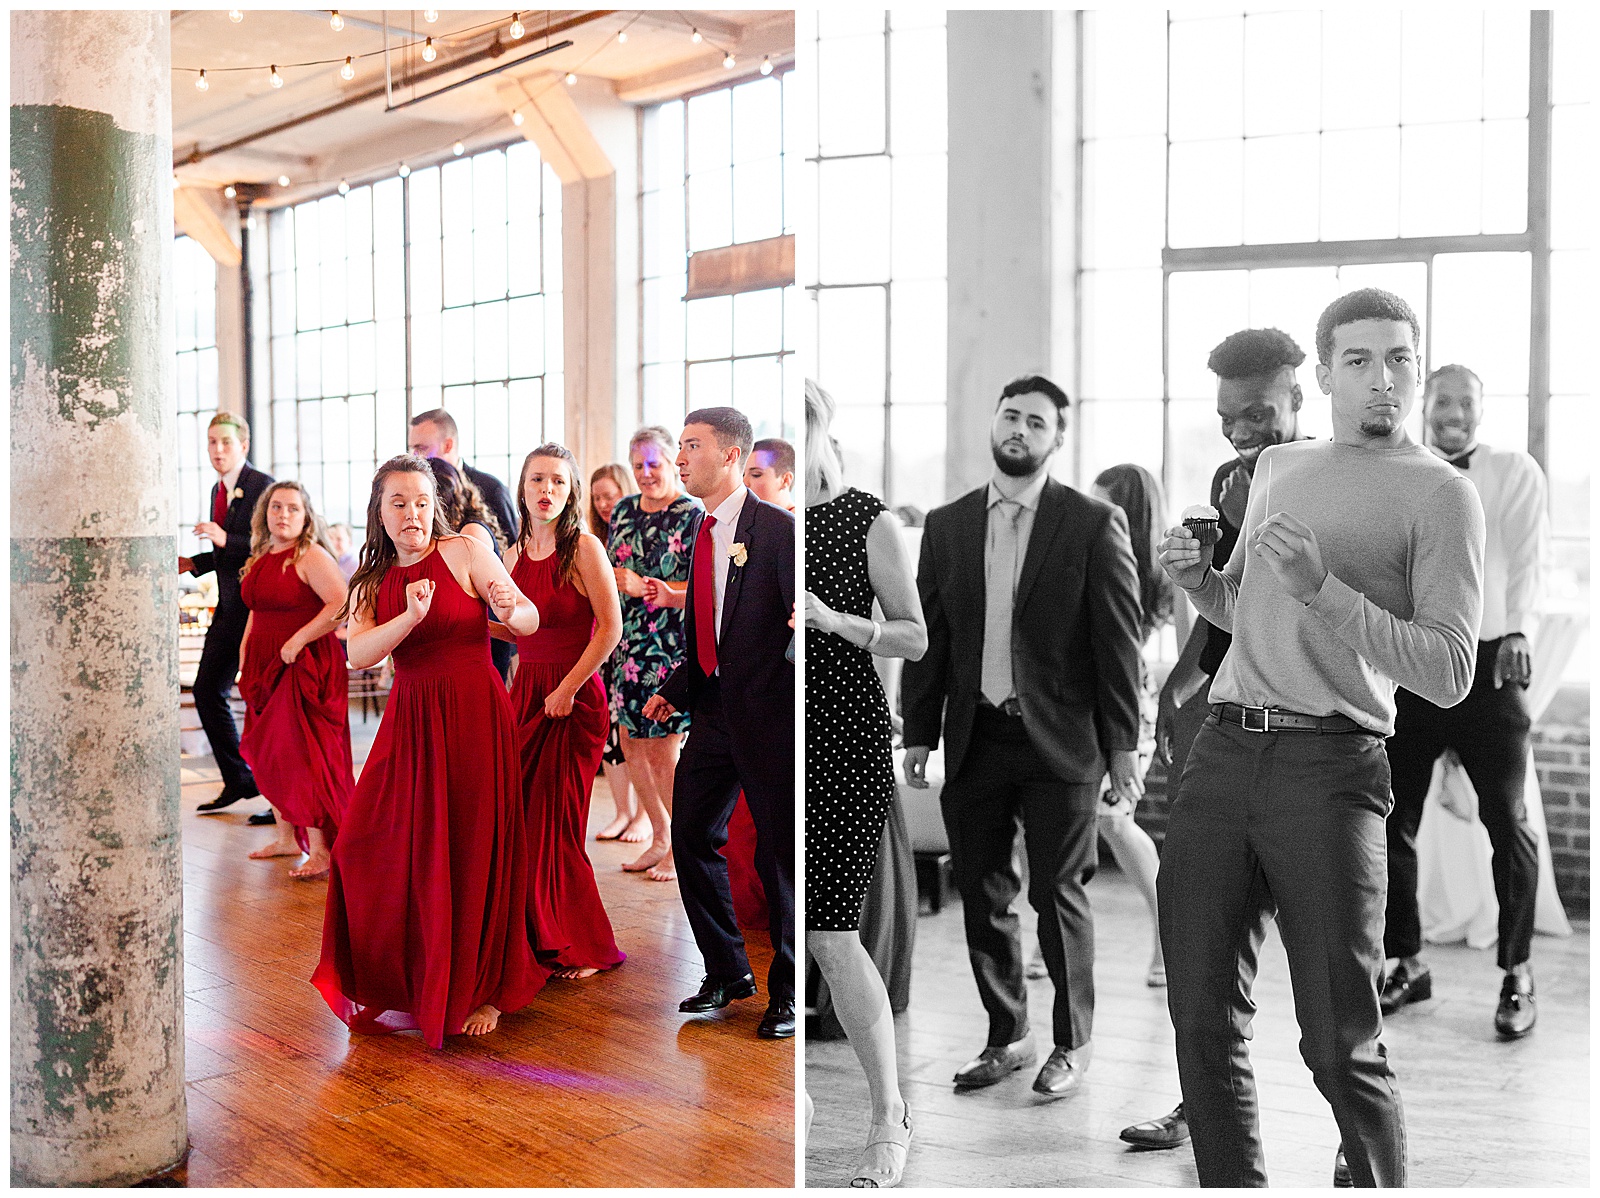 Join the dance party at Rustic Airy Indoor Wedding Venue with fairy lights - Red-Themed Bridesmaid Dress Ideas from Elegant Modern Summer Wedding in Charlotte, NC | check out the full wedding at KevynDixonPhoto.com